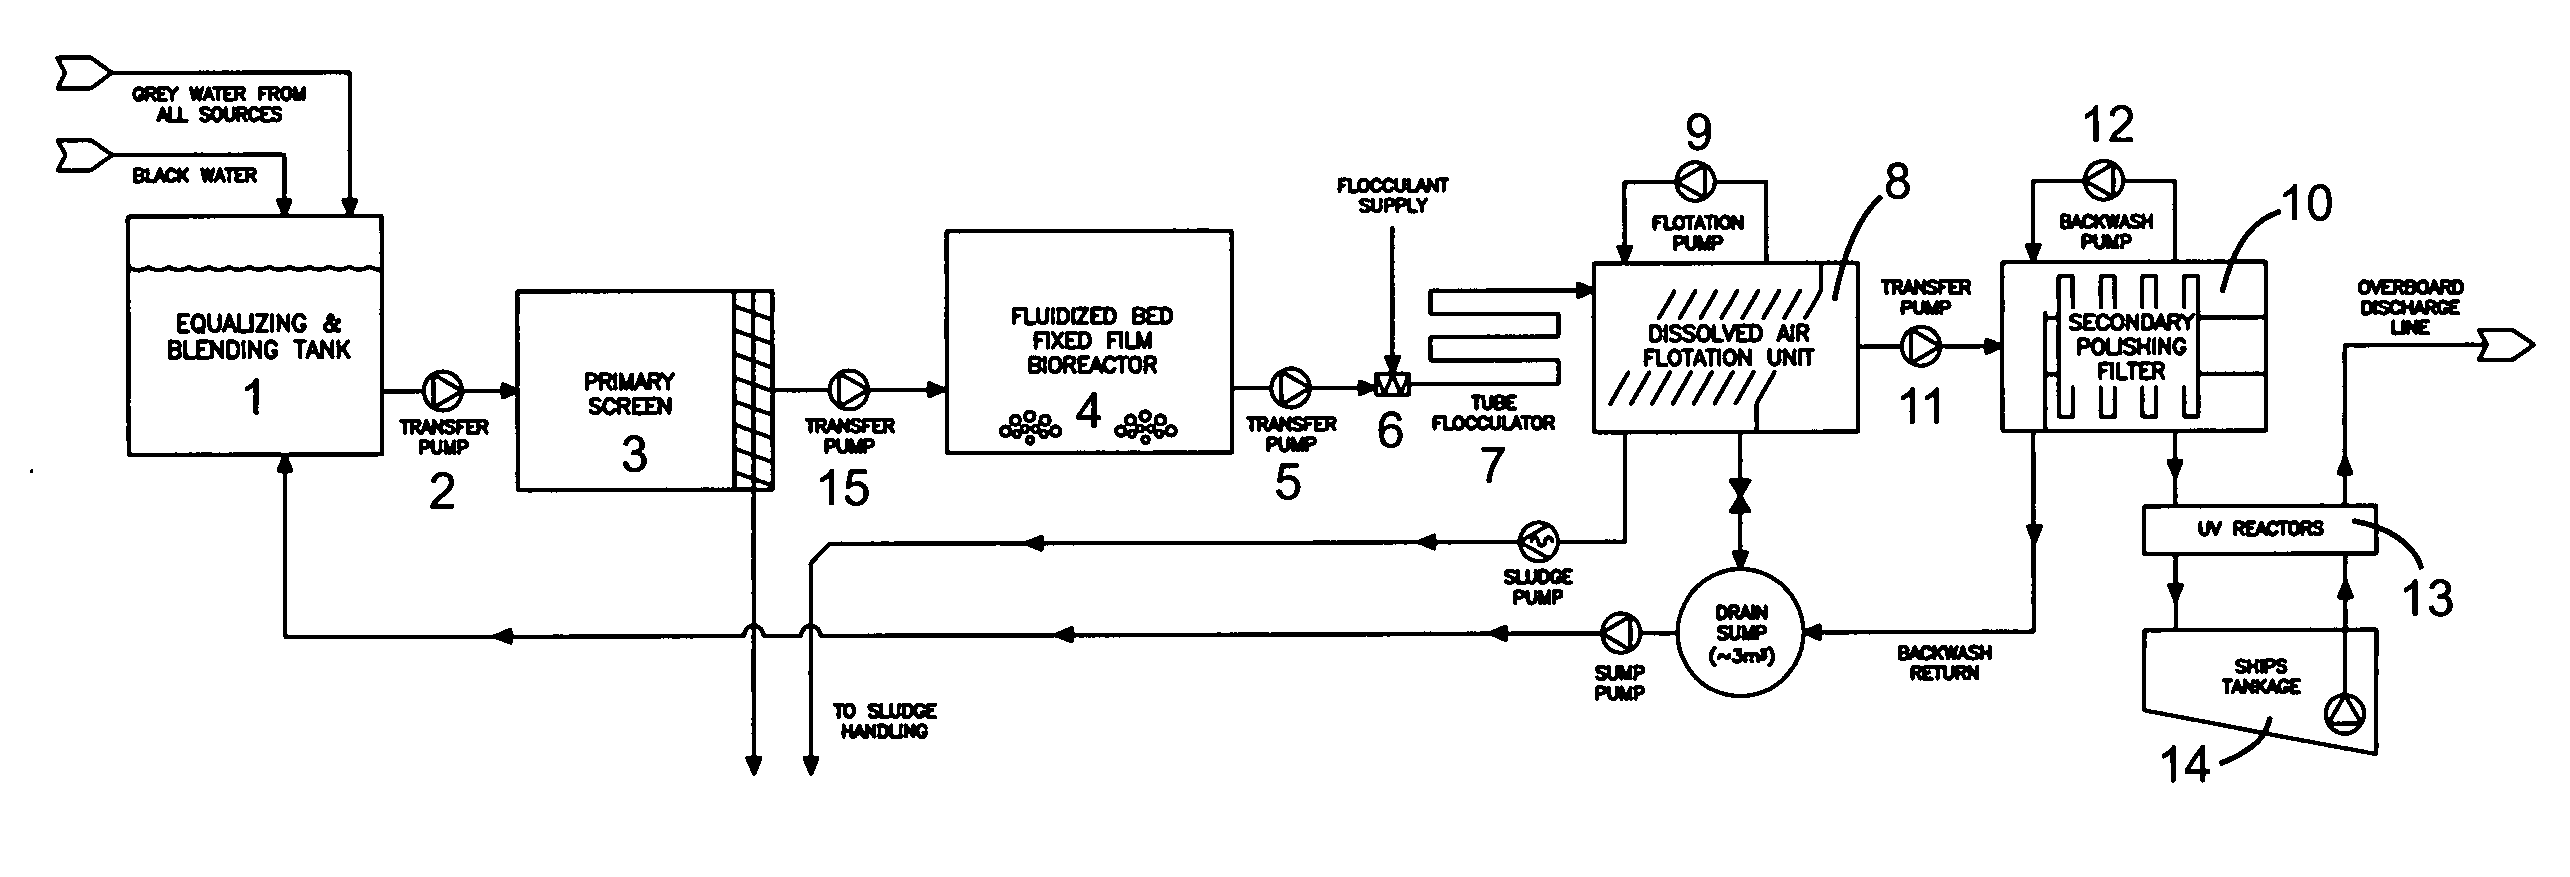 Wastewater treatment system for a marine vessel